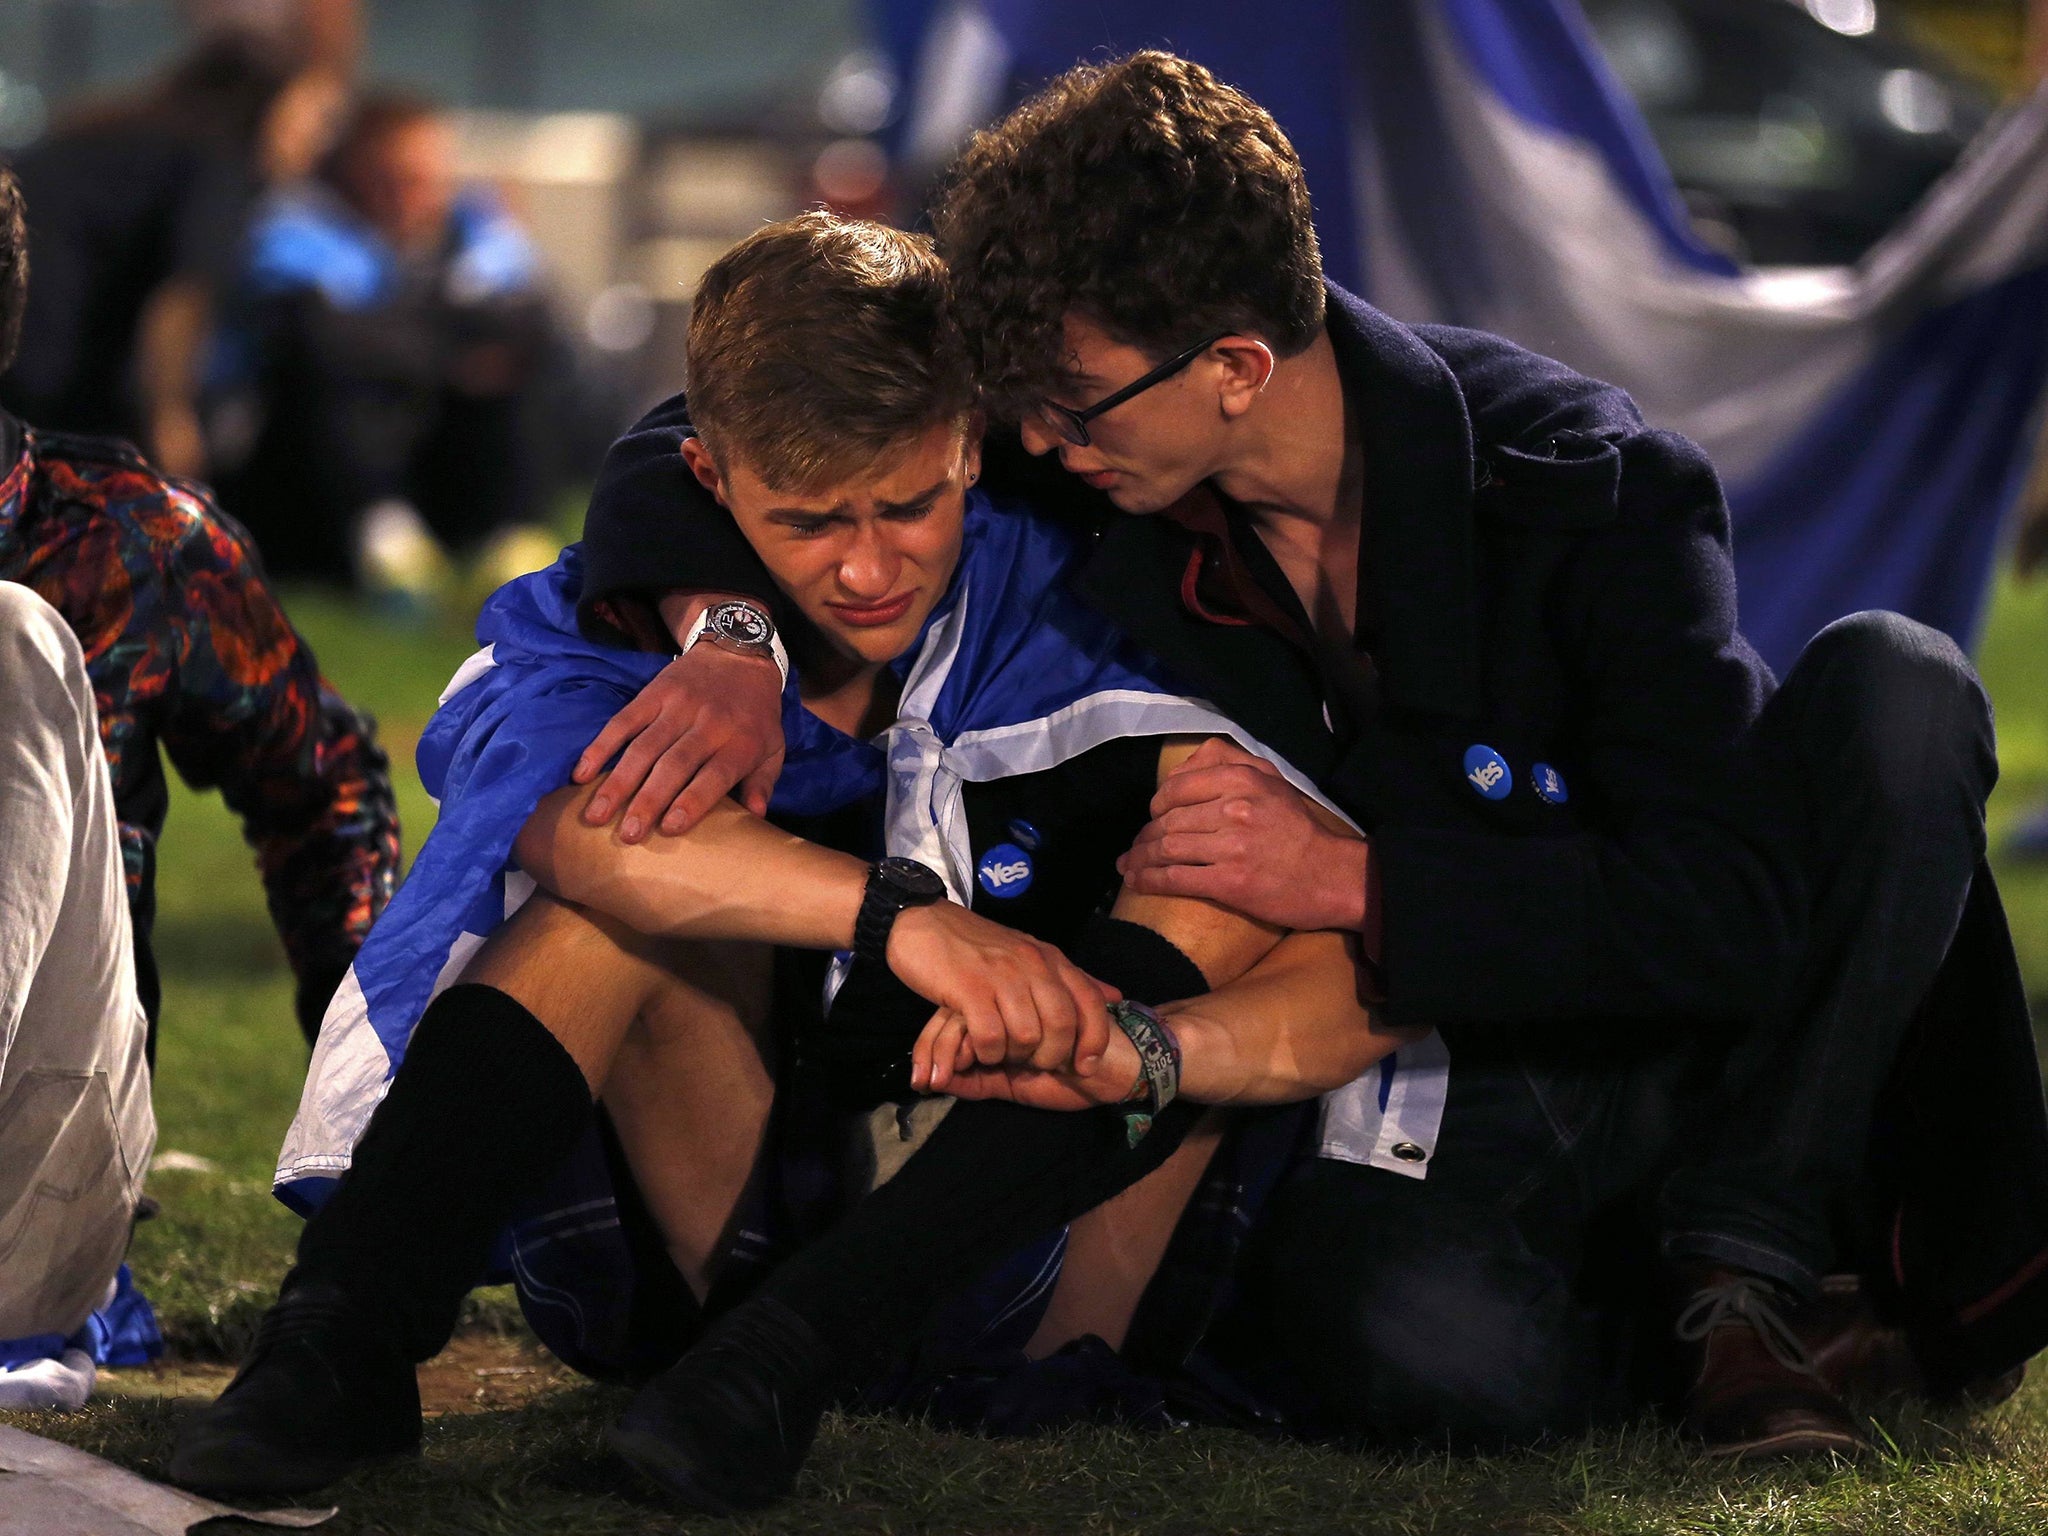 Dejected supporters from the "Yes" Campaign react as they sit in George Square in Glasgow